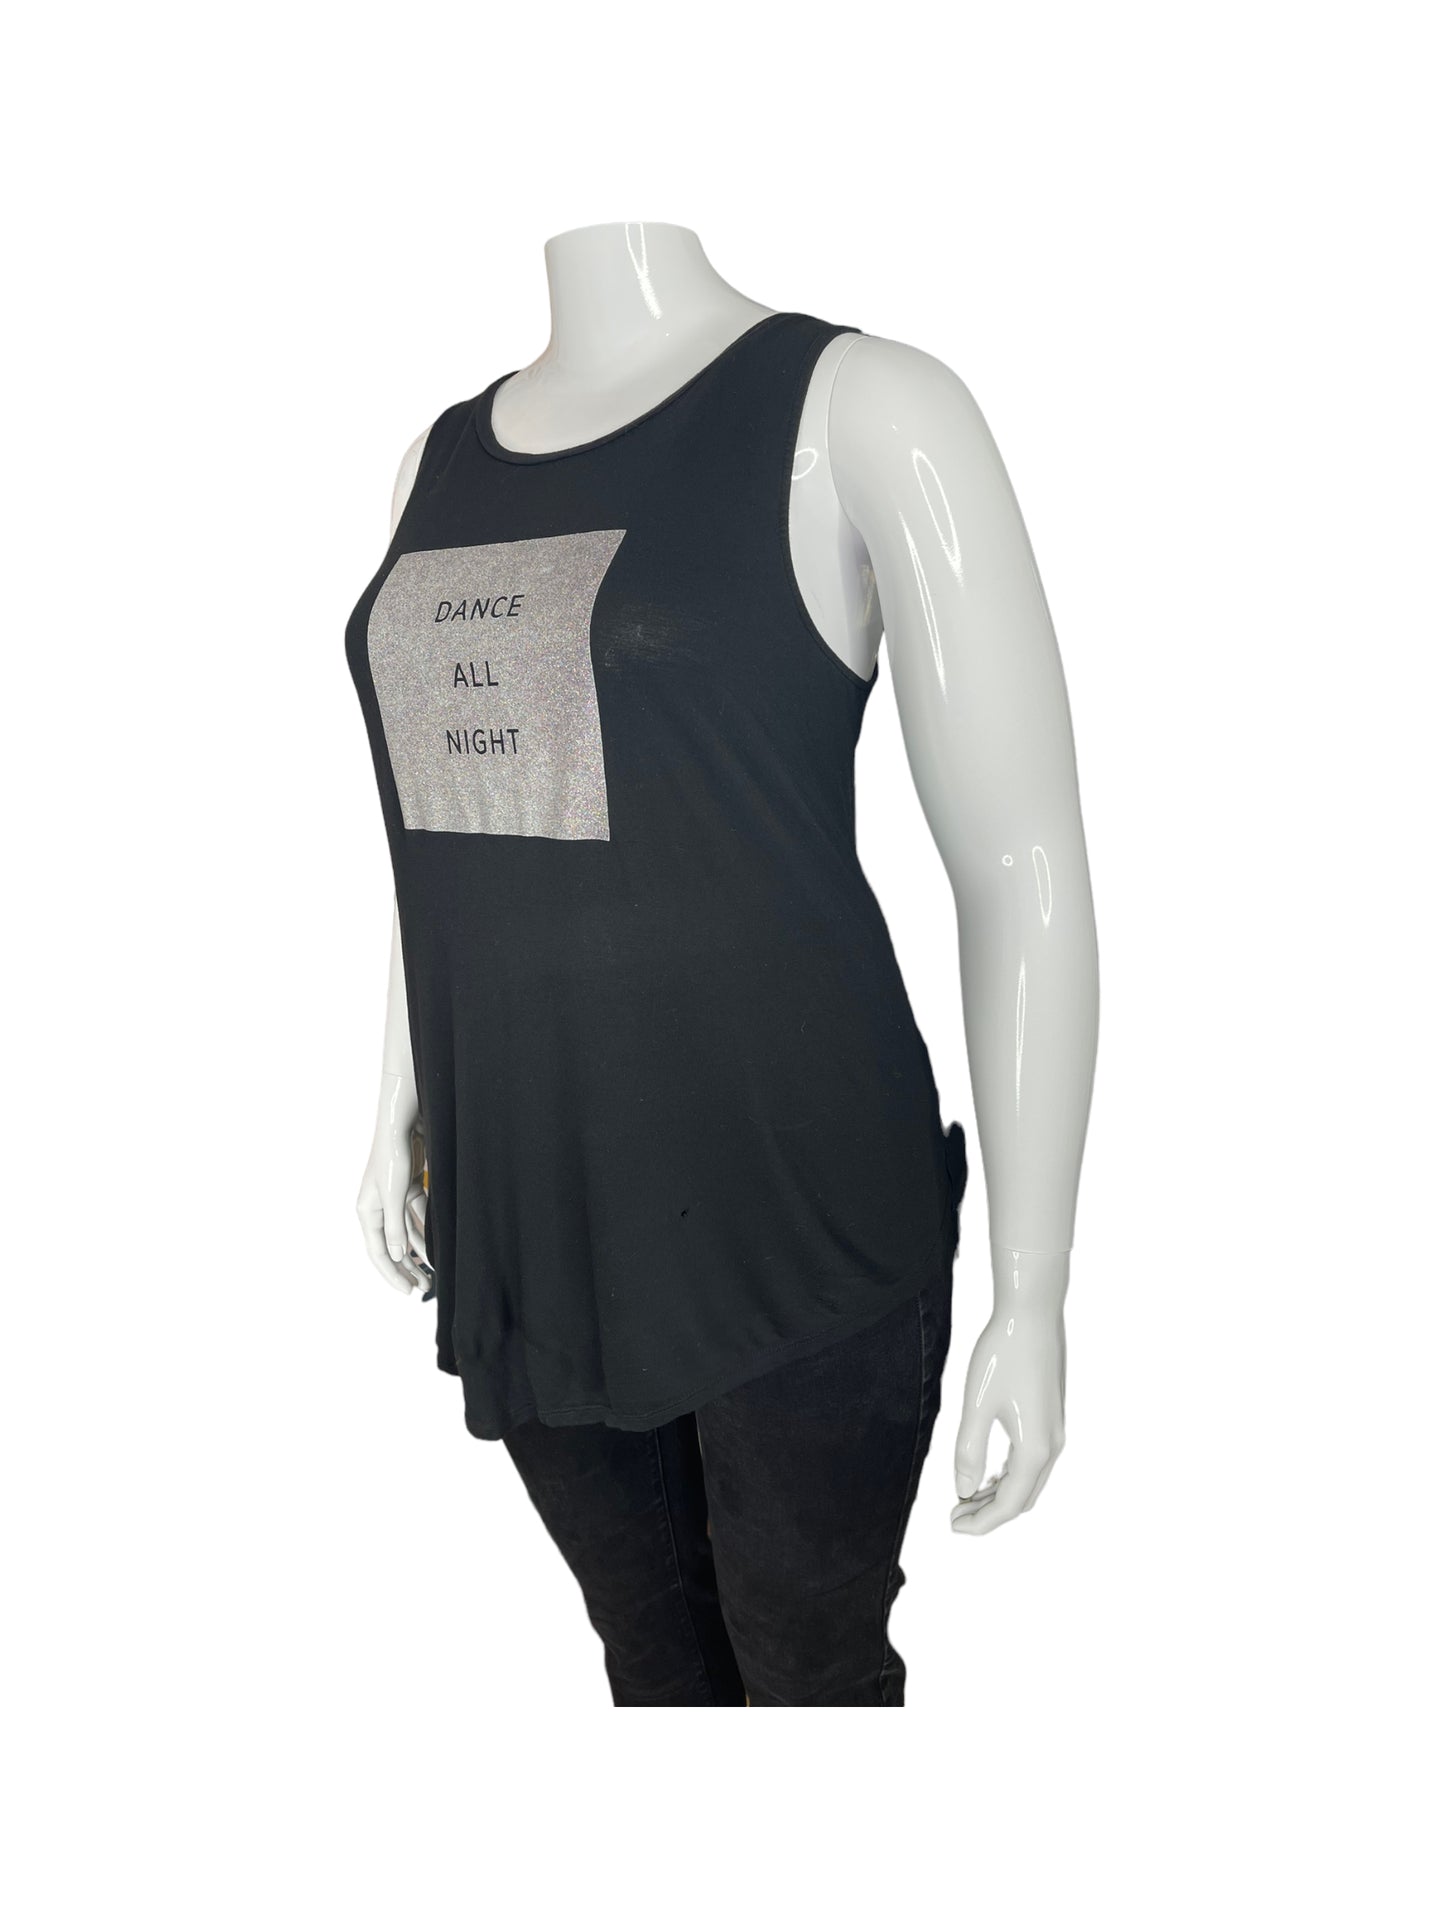 “Old Navy” Black Tank Top ‘Dance All Night’ Graphic (XL)